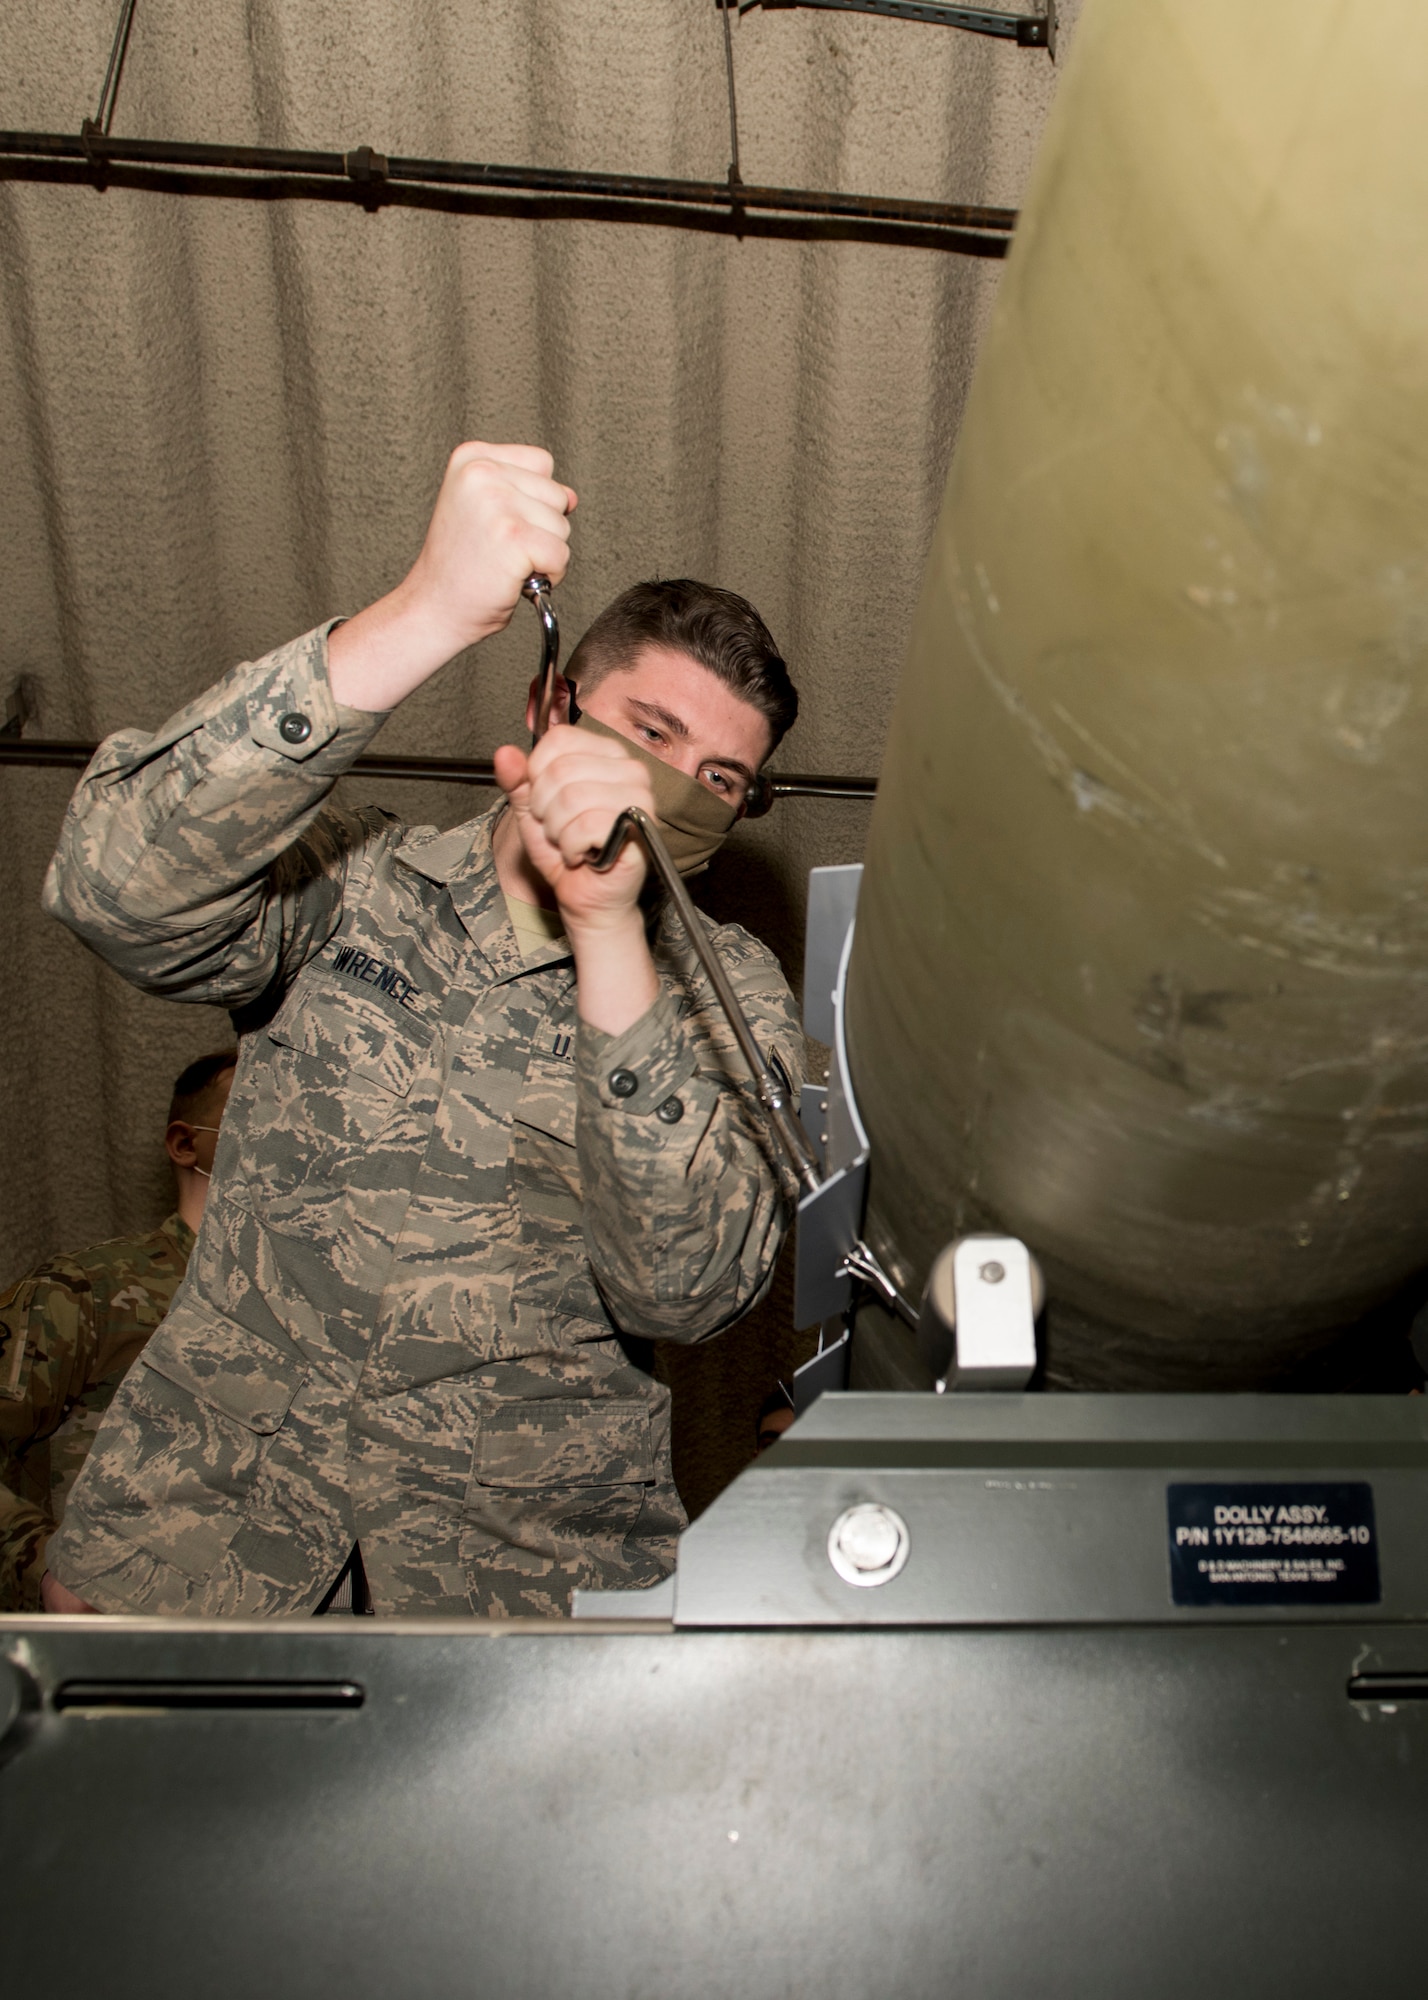 U.S. Air Force Airman 1st Class Joshua Lawrence, a 3rd Munitions Squadron stockpile management technician, installs a strake assembly onto an inert bomb during a combat munitions training class at Joint Base Elmendorf-Richardson, Alaska, Nov. 5, 2020. U.S. Air Force Tech. Sgt. Nicholas Kern, the 3rd MUNS training section chief, revamped his squadron’s training section and implemented an expanded CMT program that familiarizes ammo troops with a variety of munitions in one location.